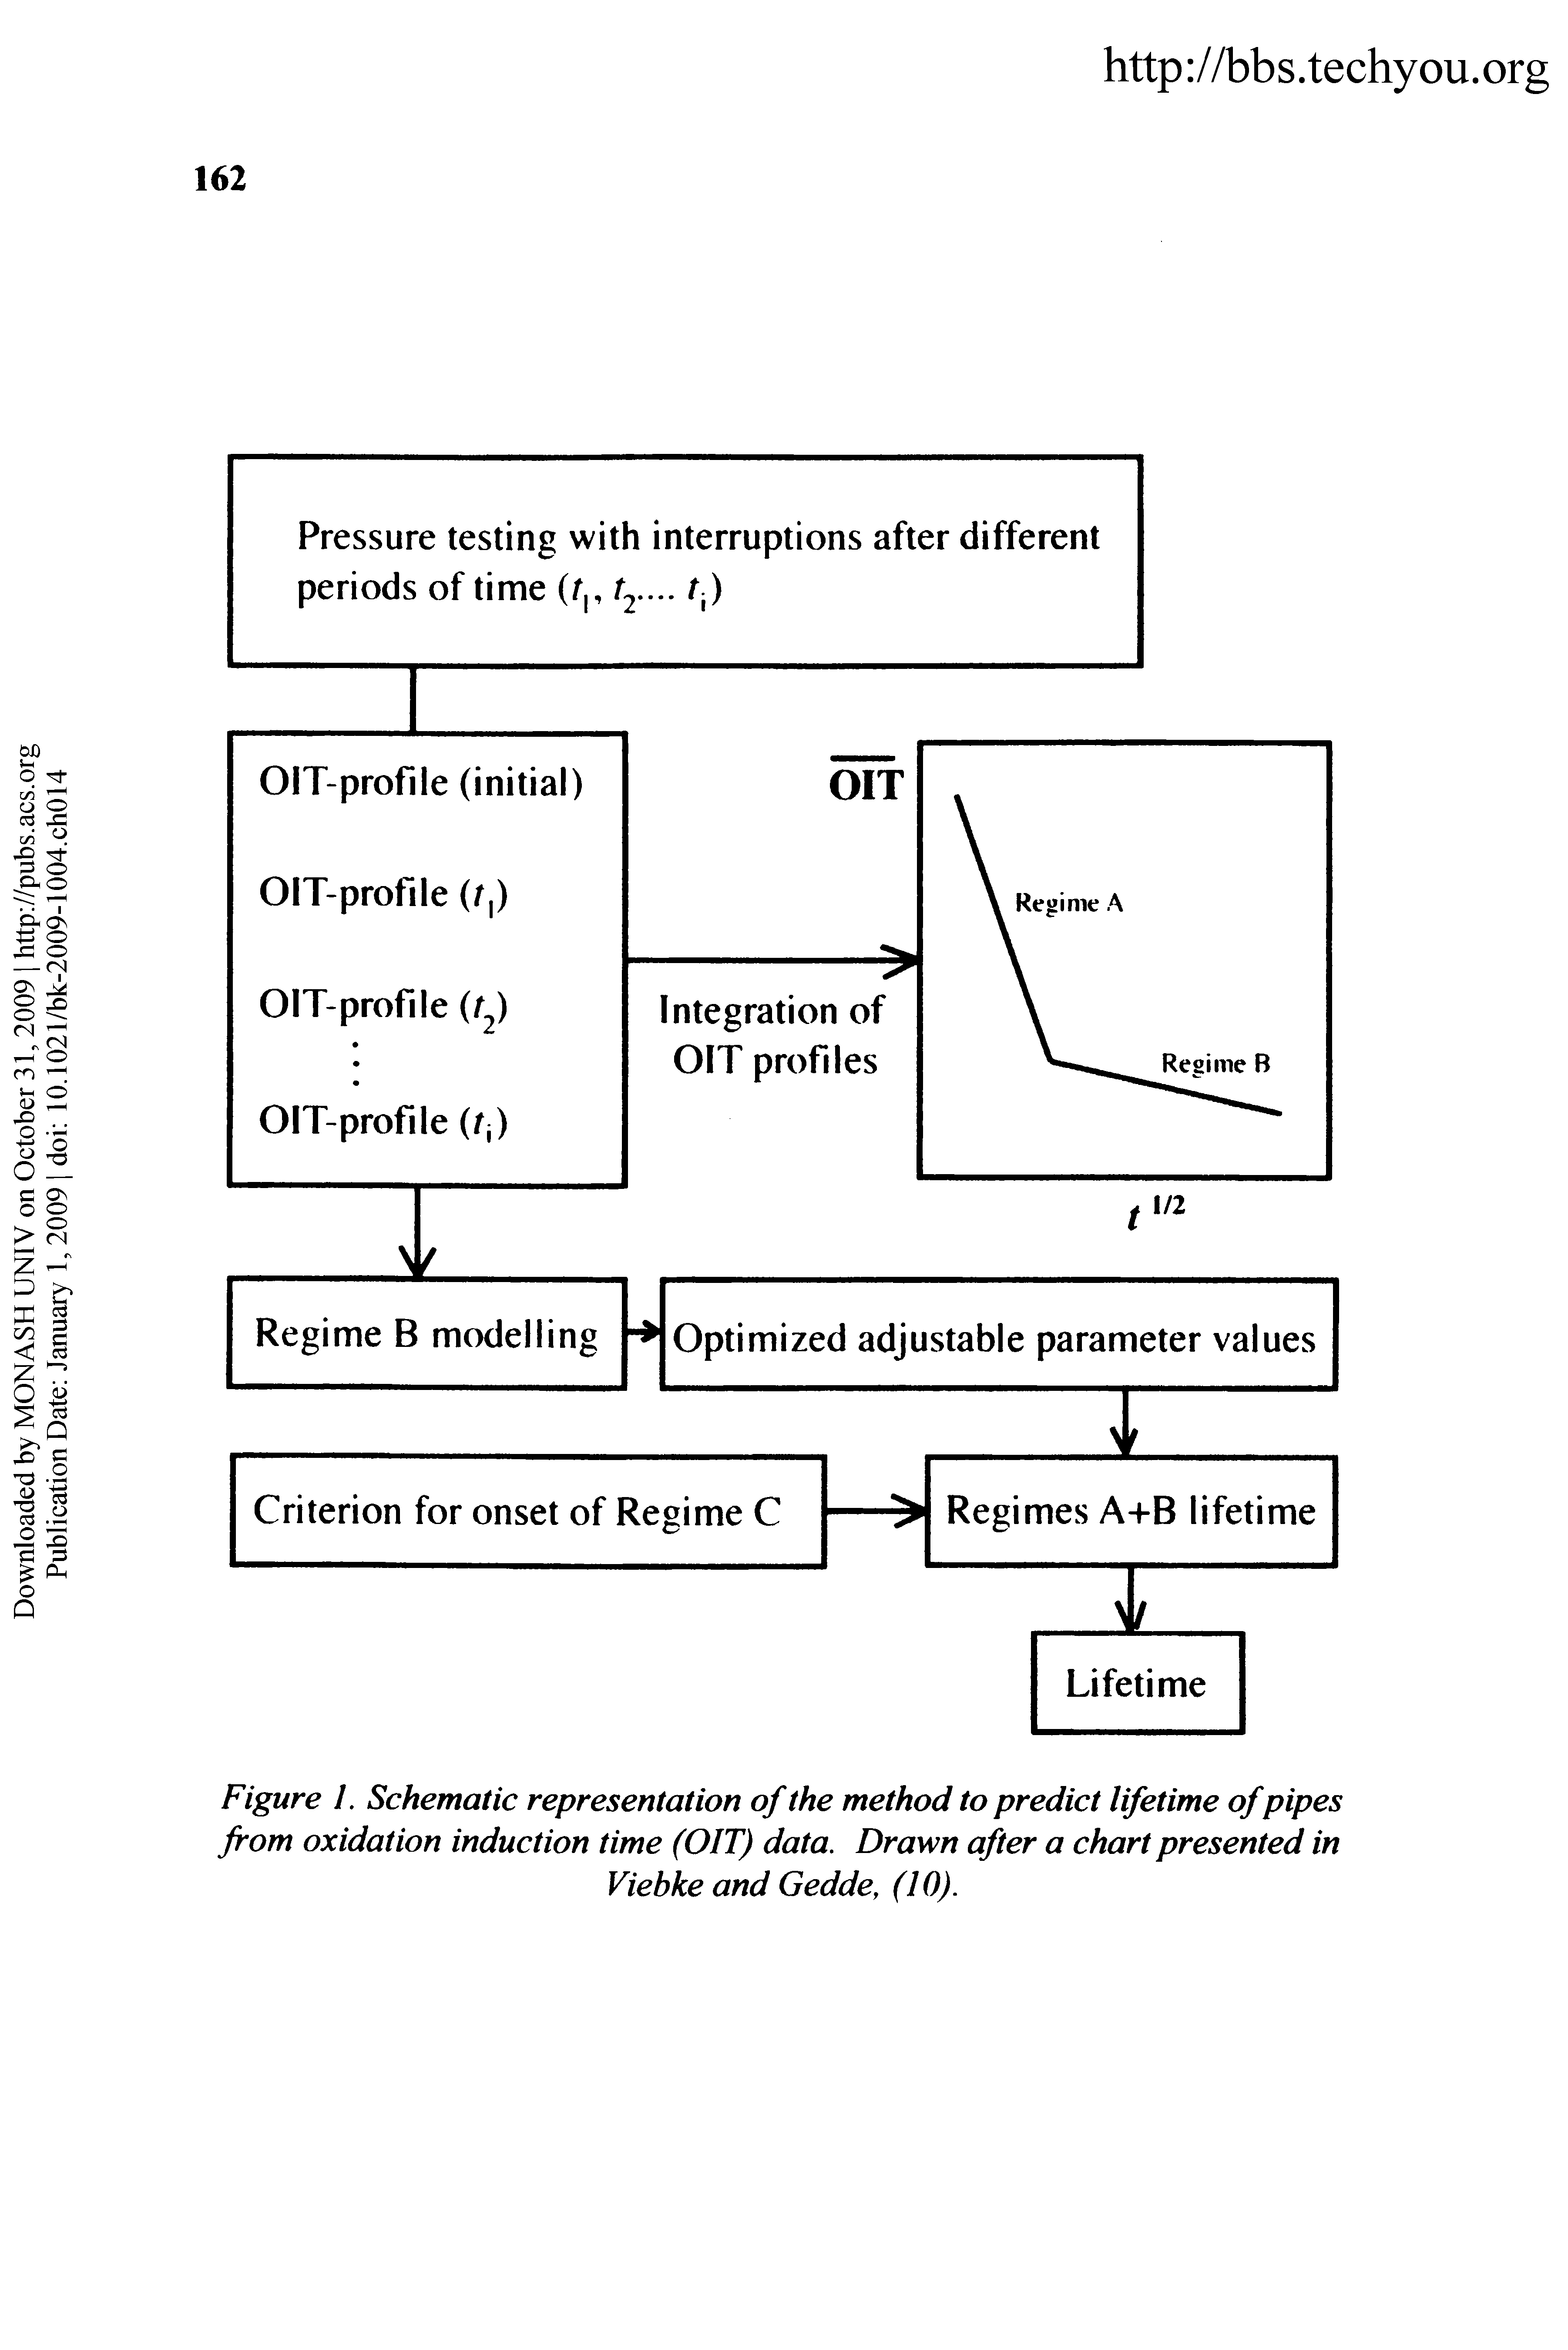 Figure 1. Schematic representation of the method to predict lifetime ofpipes from oxidation induction time (OIT) data. Drawn after a chart presented in Viebke and Gedde, (10).